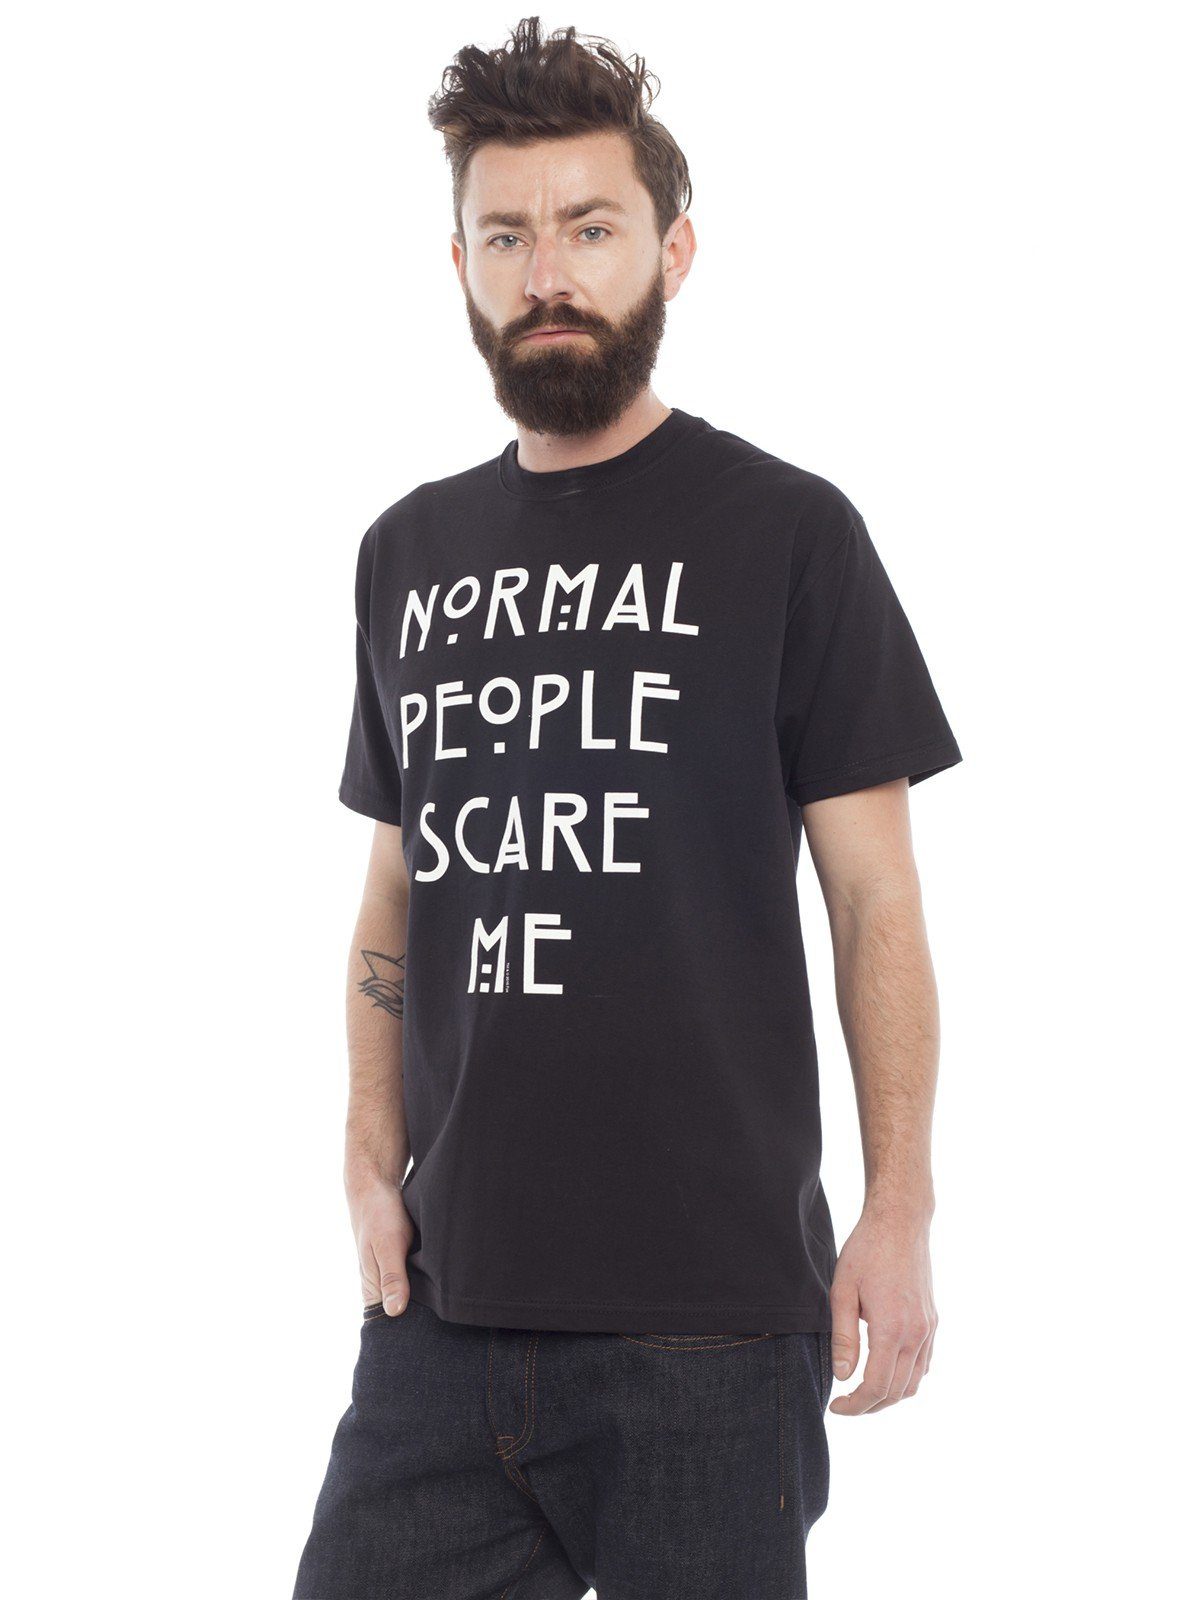 American Horror Story T-Shirt Normal People